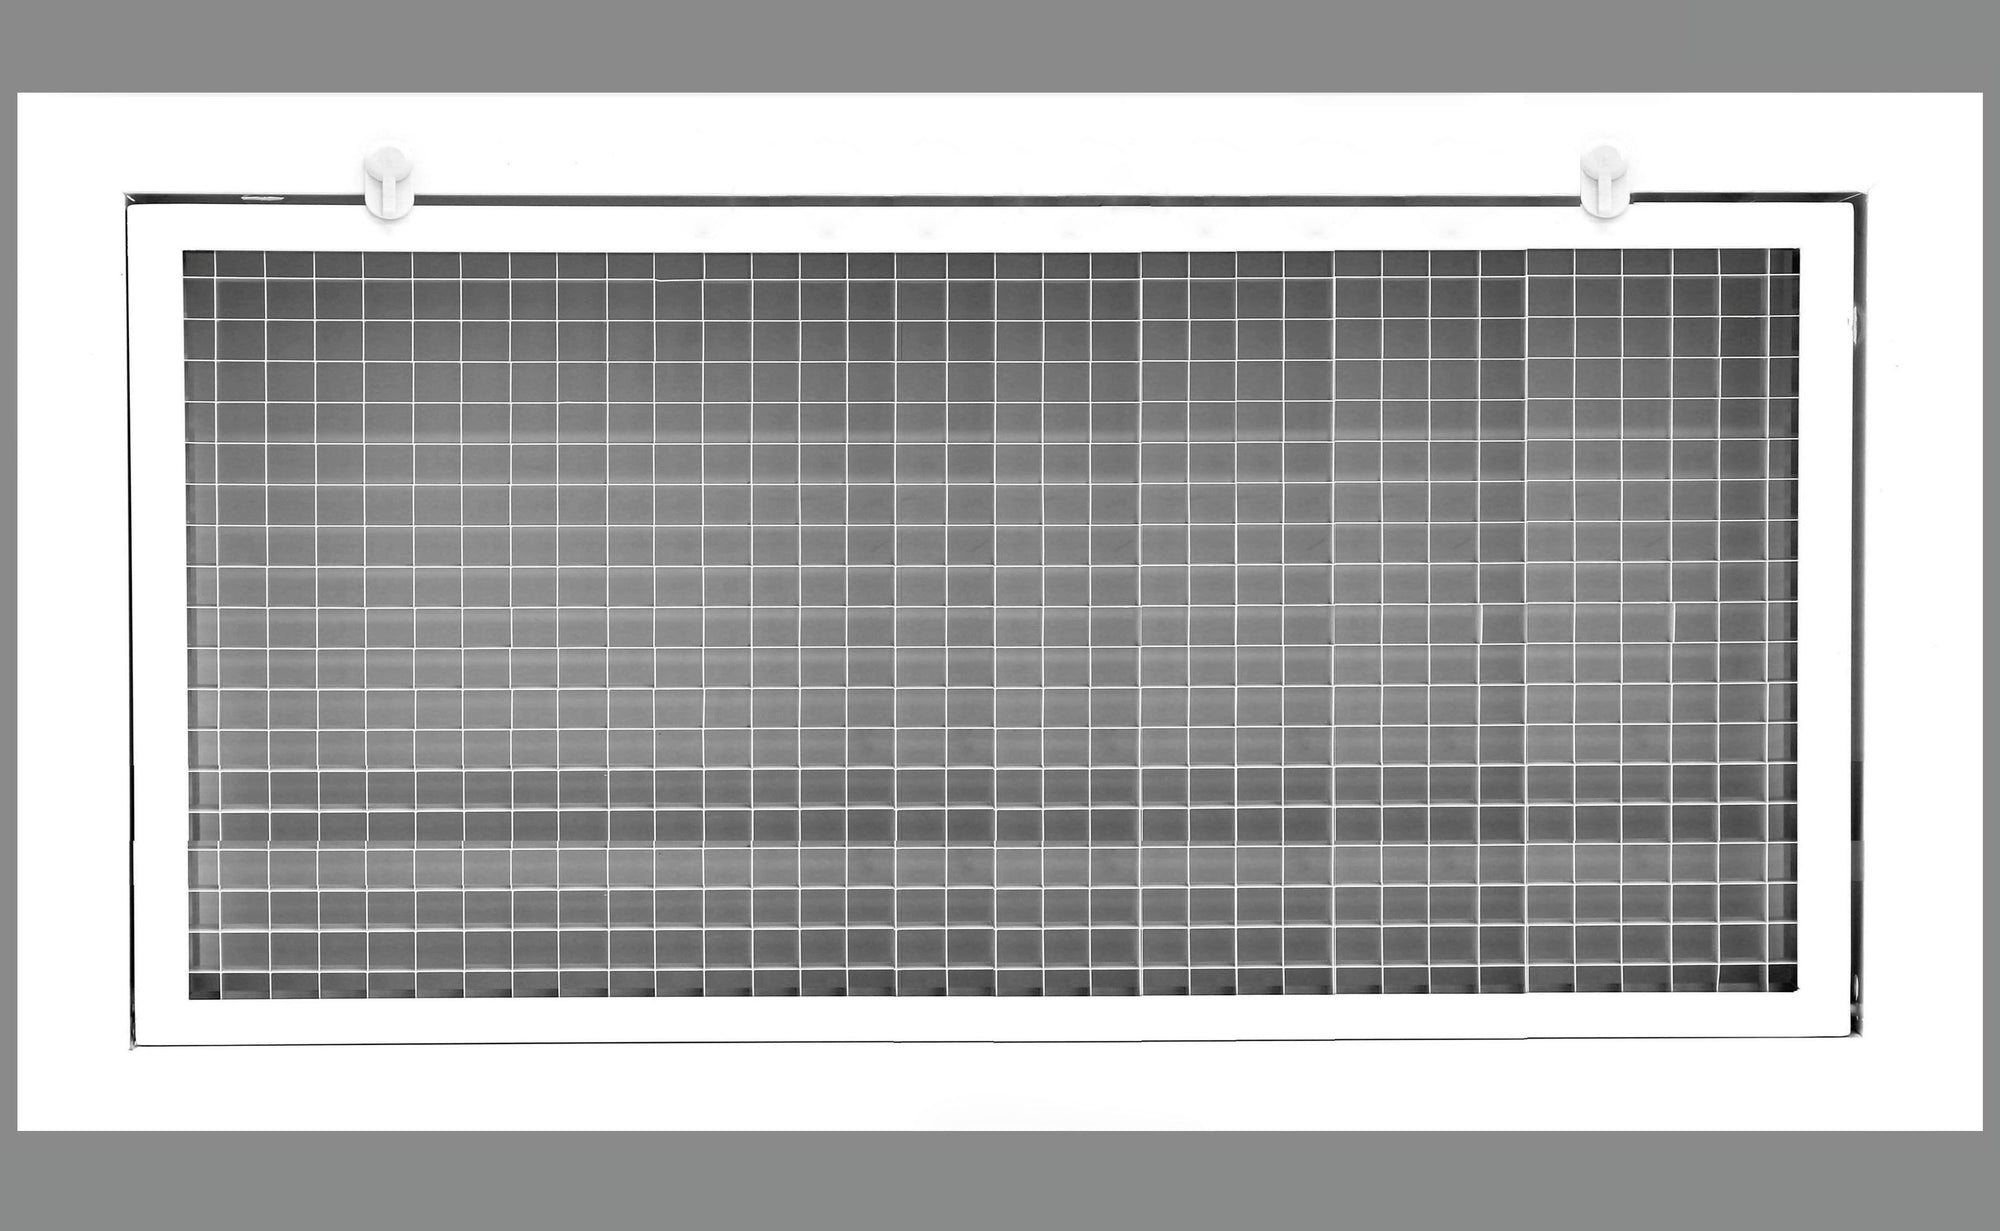 30" x 14" Cube Core Eggcrate Return Air Filter Grille for 1" Filter